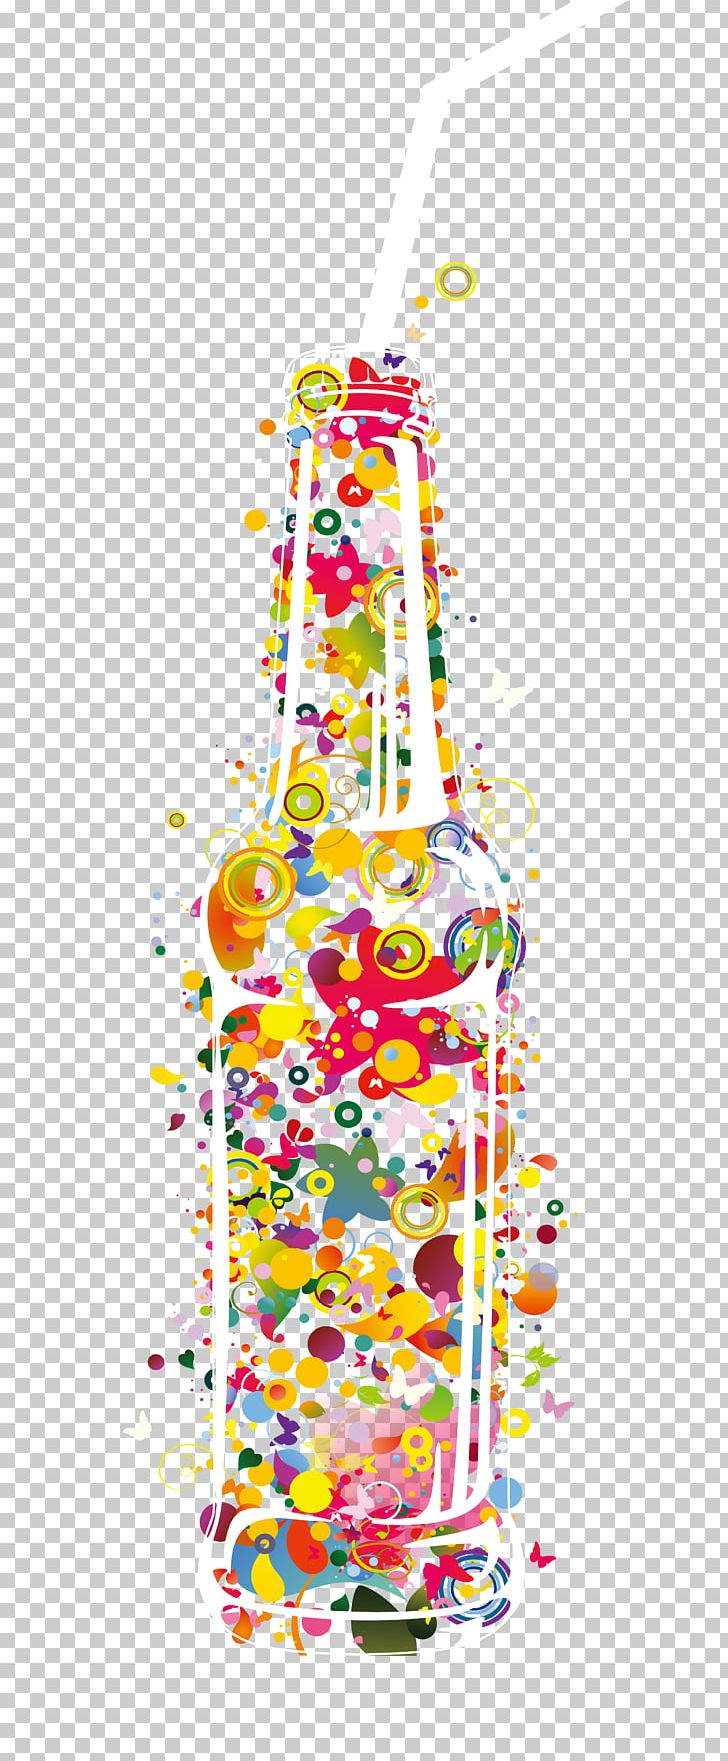 Cocktail Glass Drink PNG, Clipart, Art, Calice, Cocktail, Cocktail Glass, Cocktails Free PNG Download